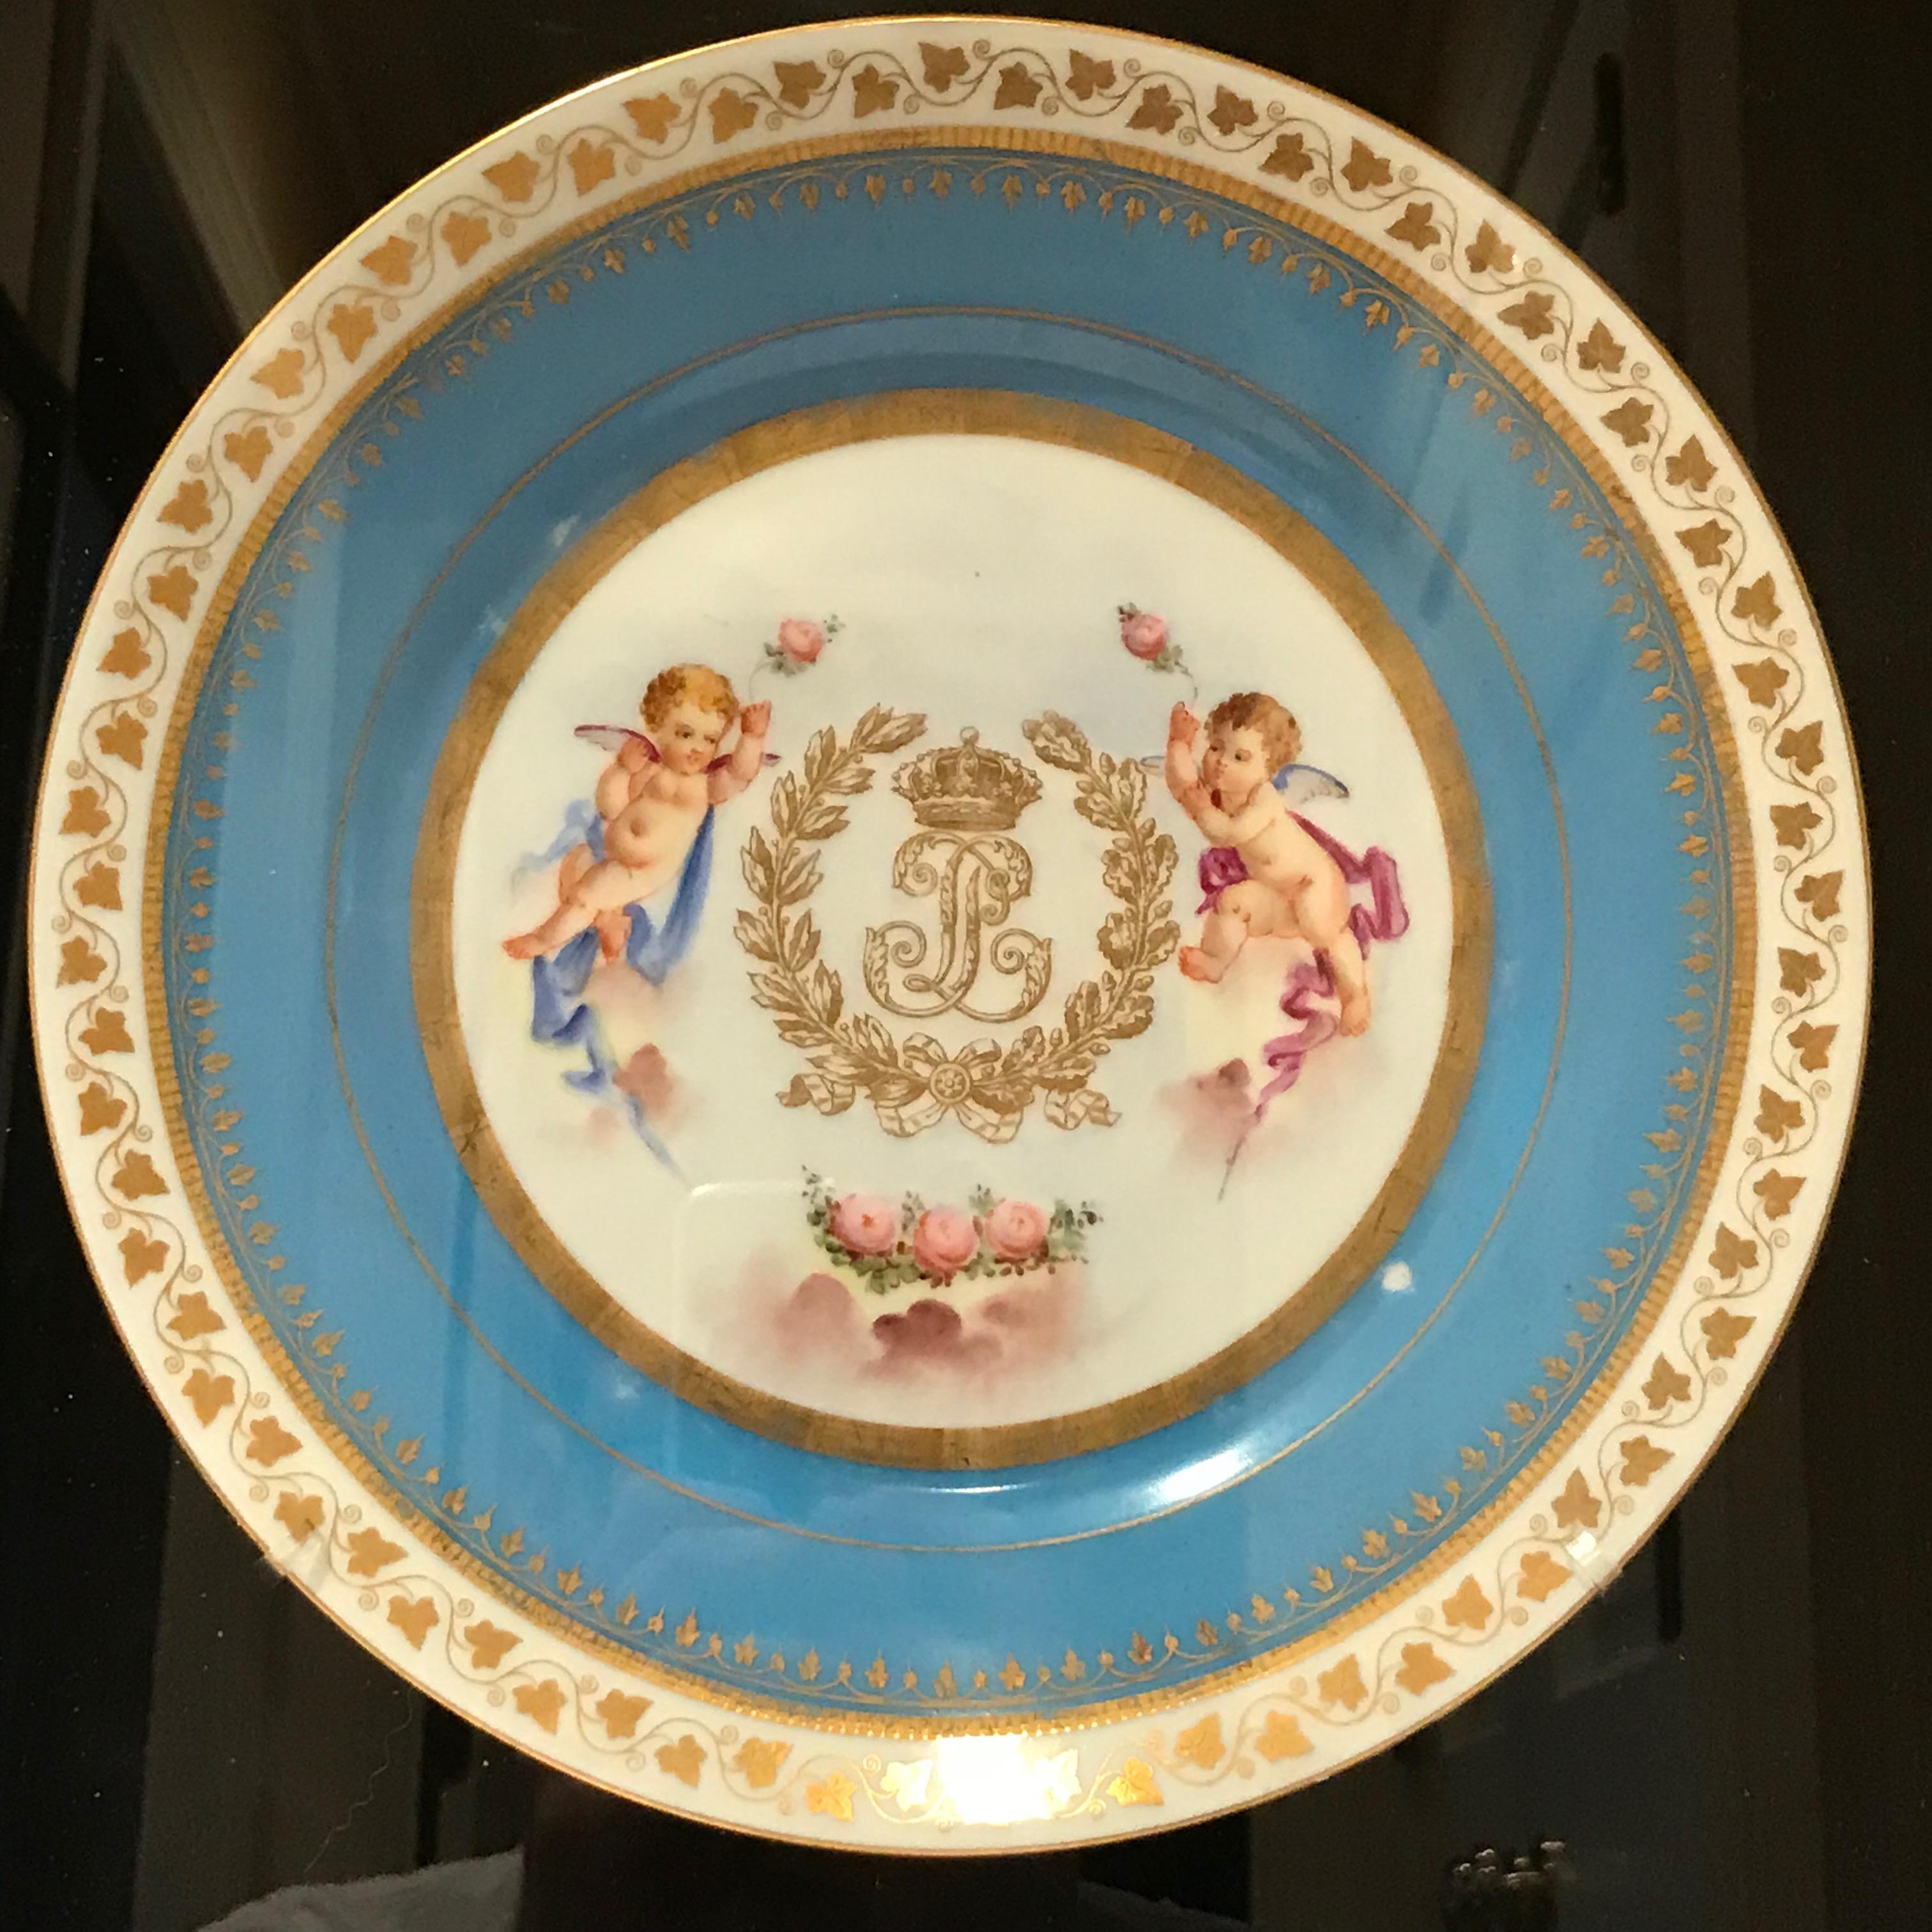 Sèvres 1844 Louis Phillippe cabinet plate, mounted in shadow box. Plate measure 9.5